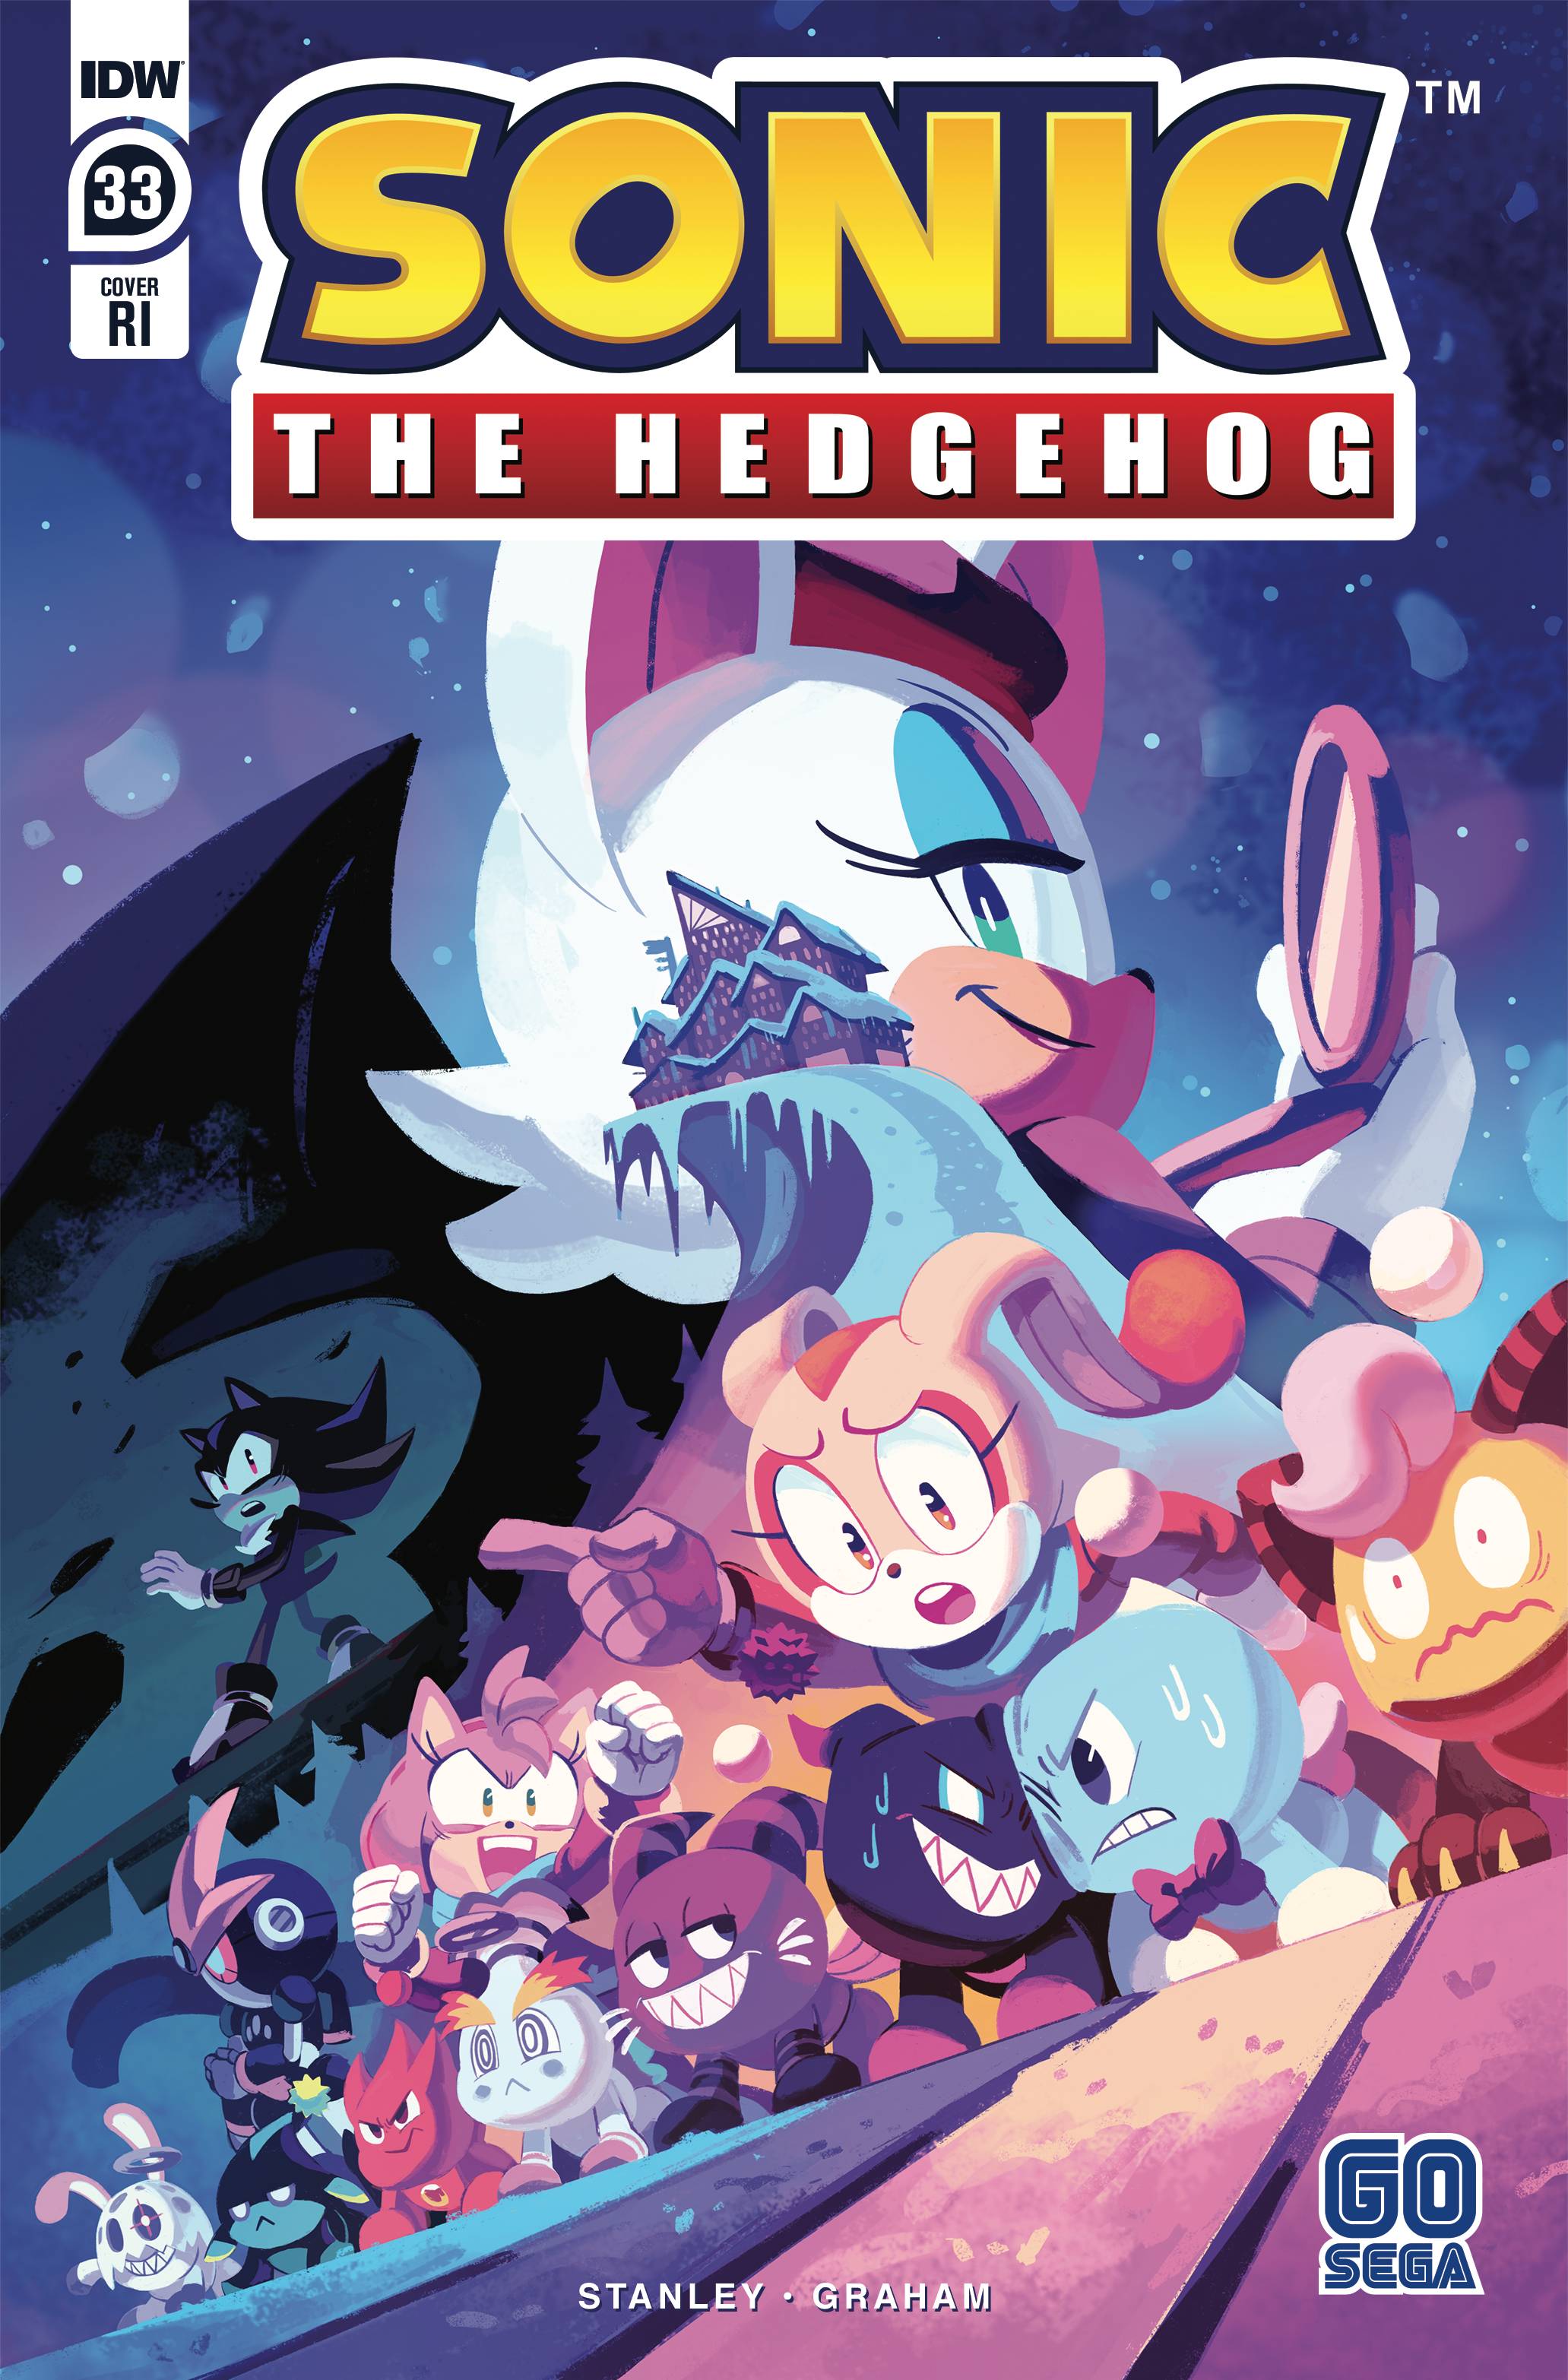 Pin by Katie on Sonic IDW Comics